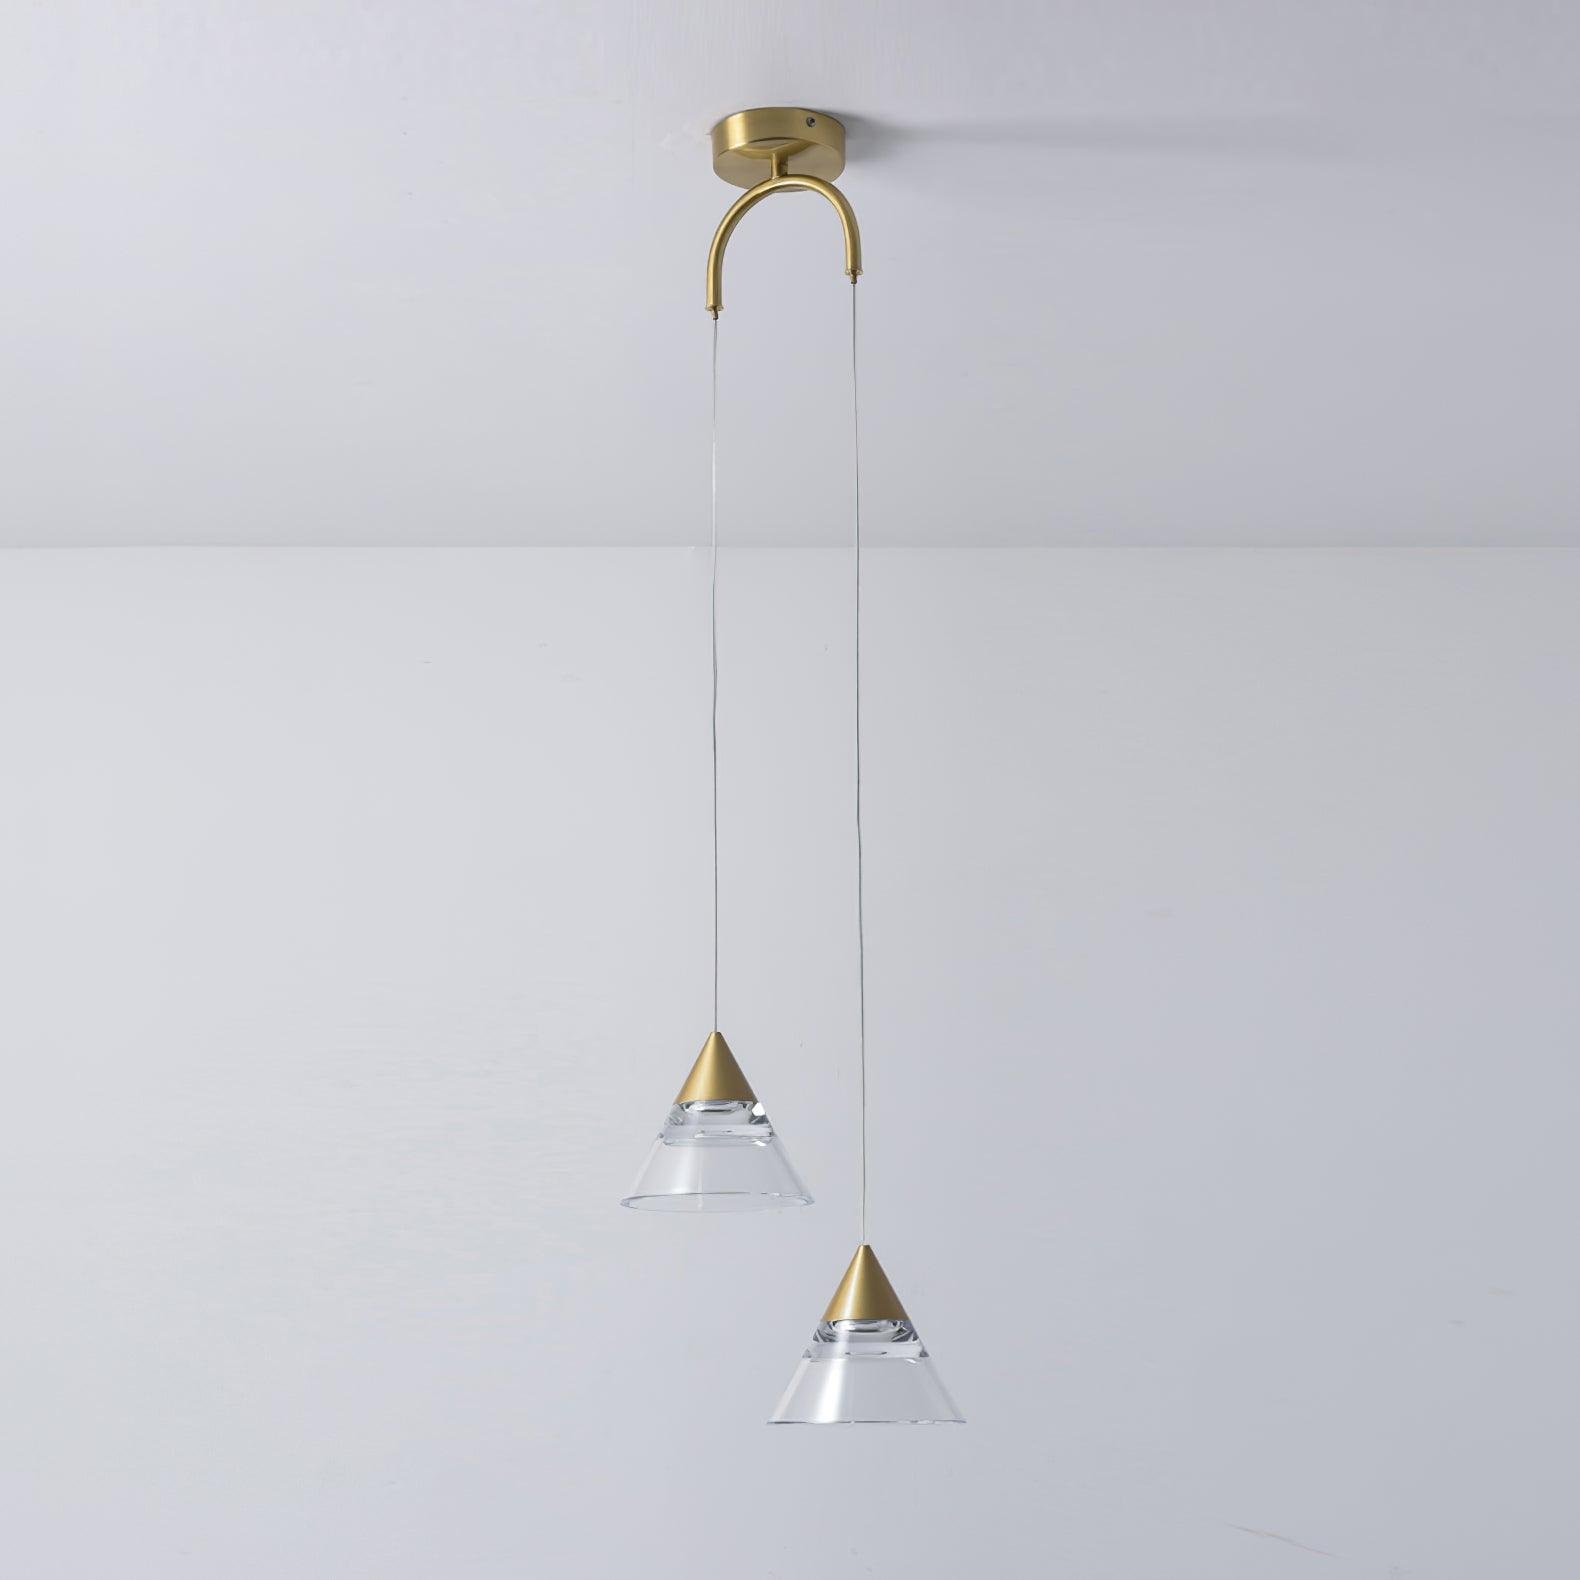 Mini Pendant Light featuring 2 heads, with dimensions of Ø 10.2" x H 59" (26cm x 150cm), in a sleek polished brass and clear finish, offering a refreshing cool light.